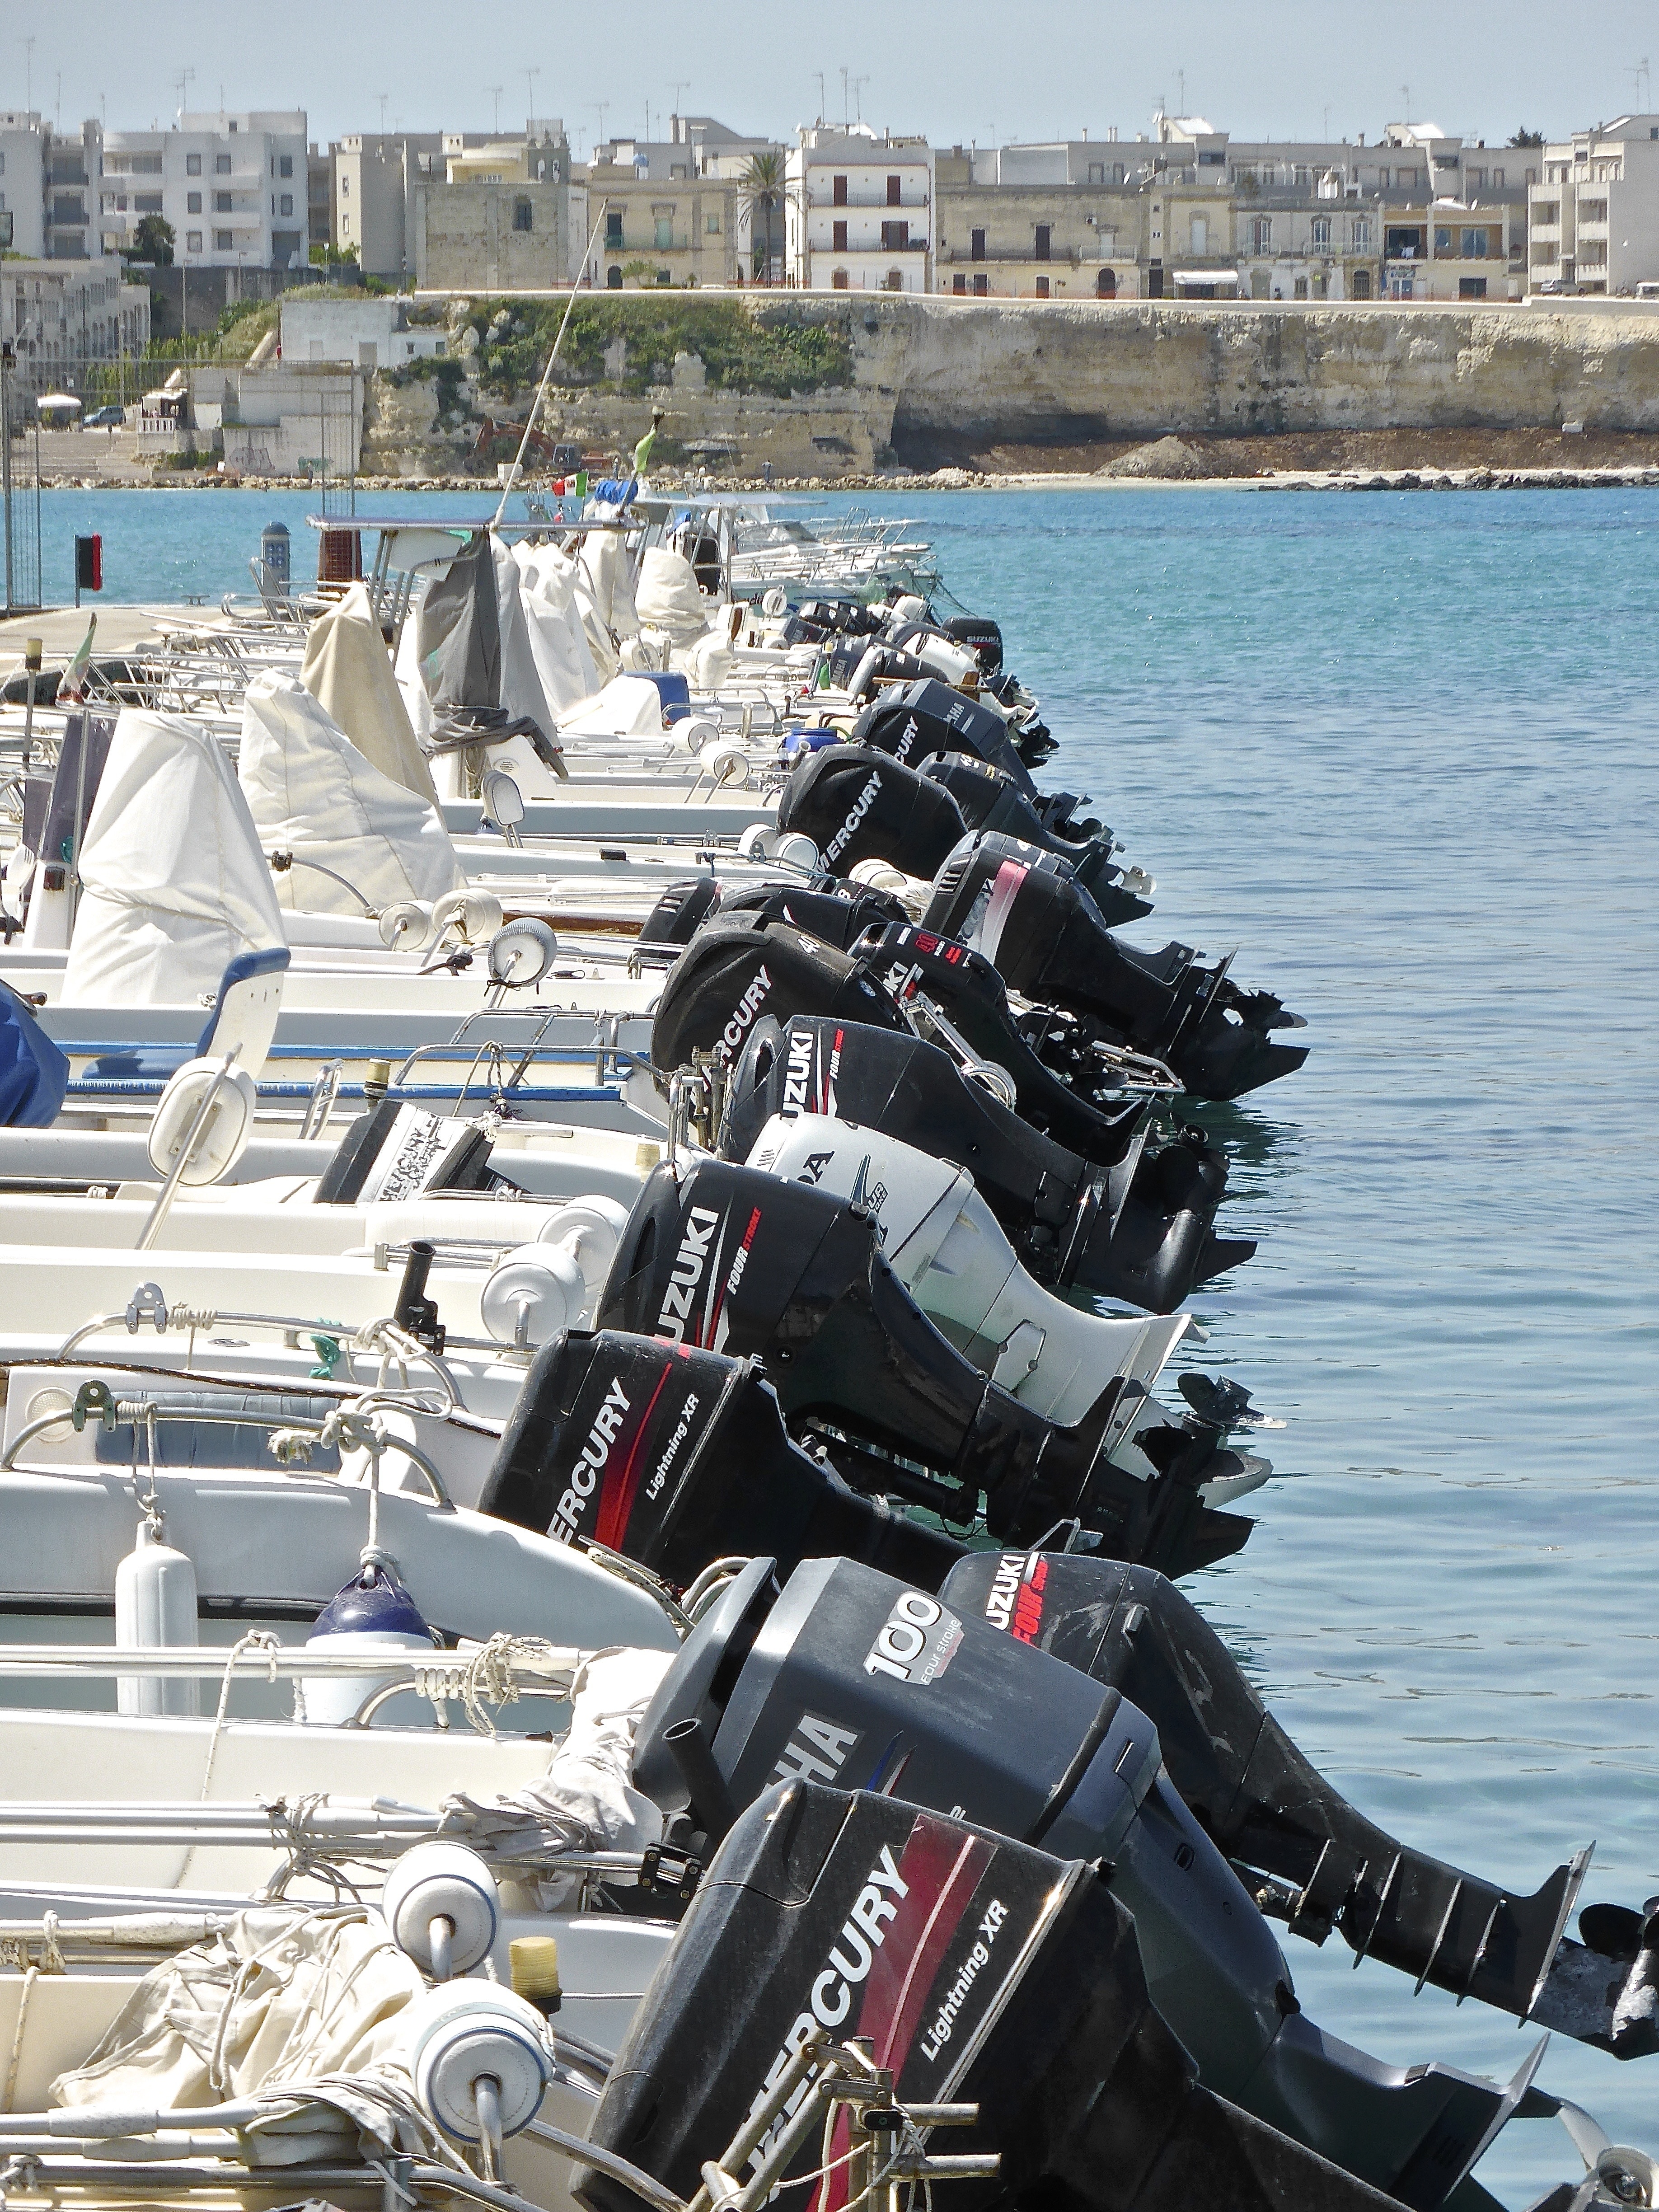 black outboard motors on boat near body of waters during daytime